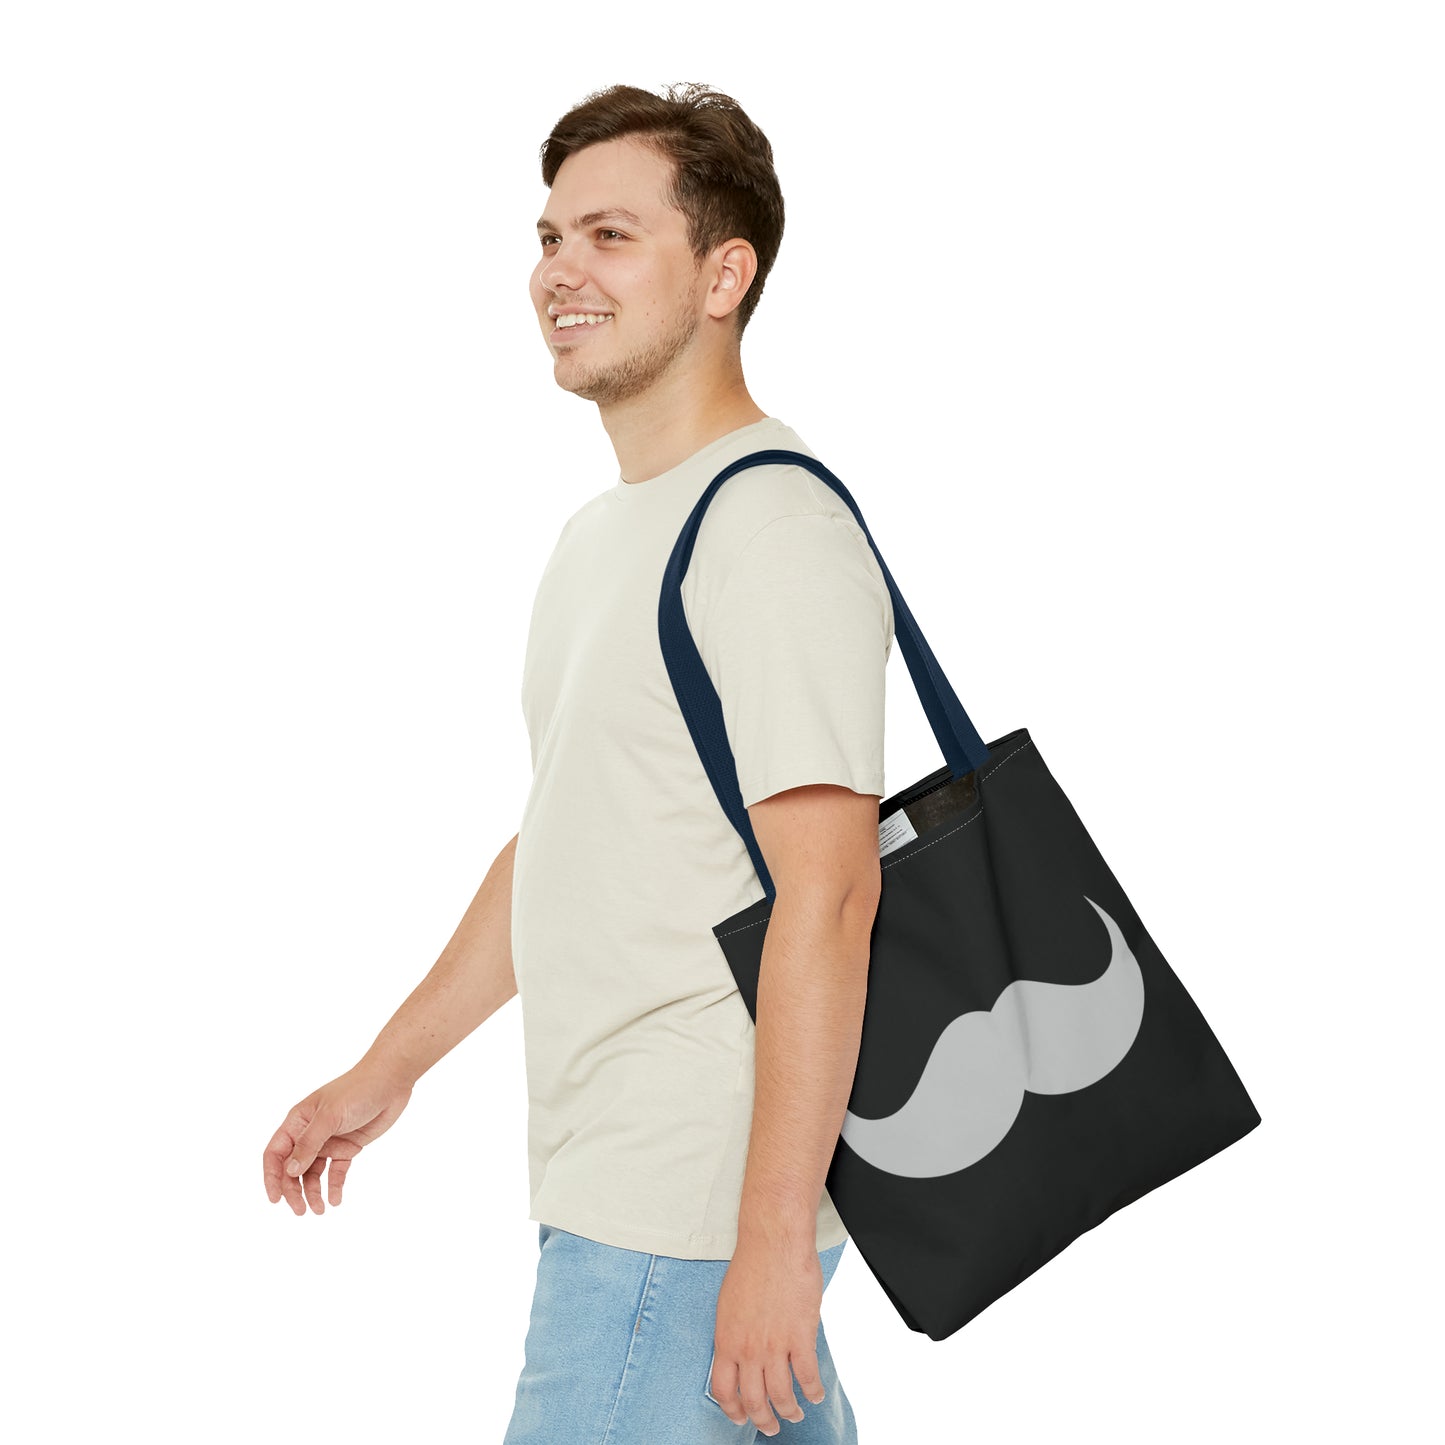 Moustache Tote Bag - Wicked Naughty Apparel